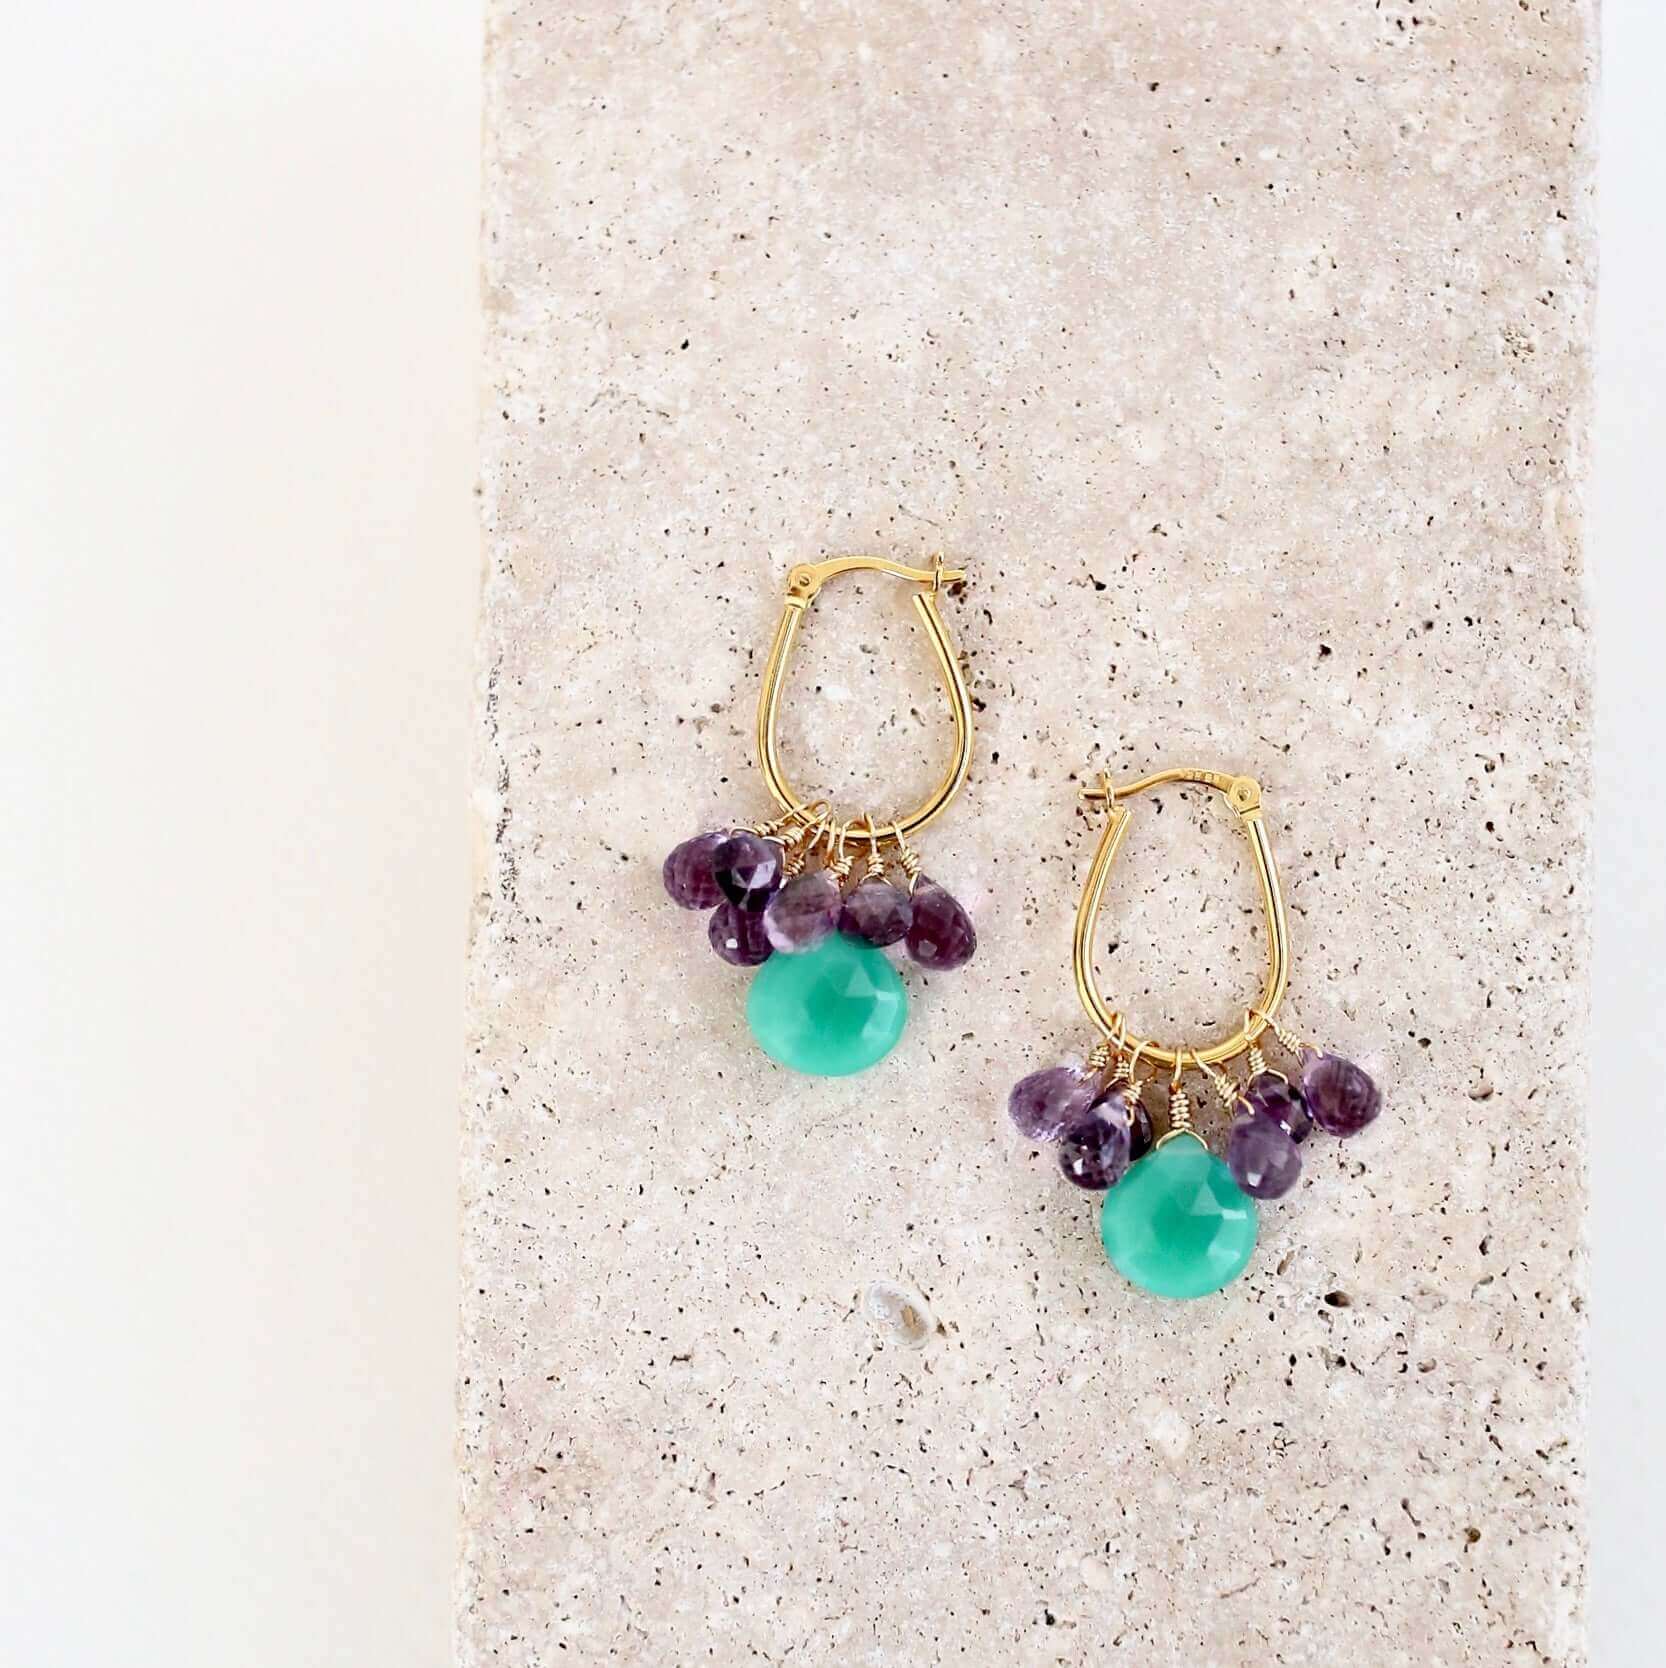 Chrysoprase and Amethyst Earrings - Vibrant Sea Green and Sparkling Purple Hues